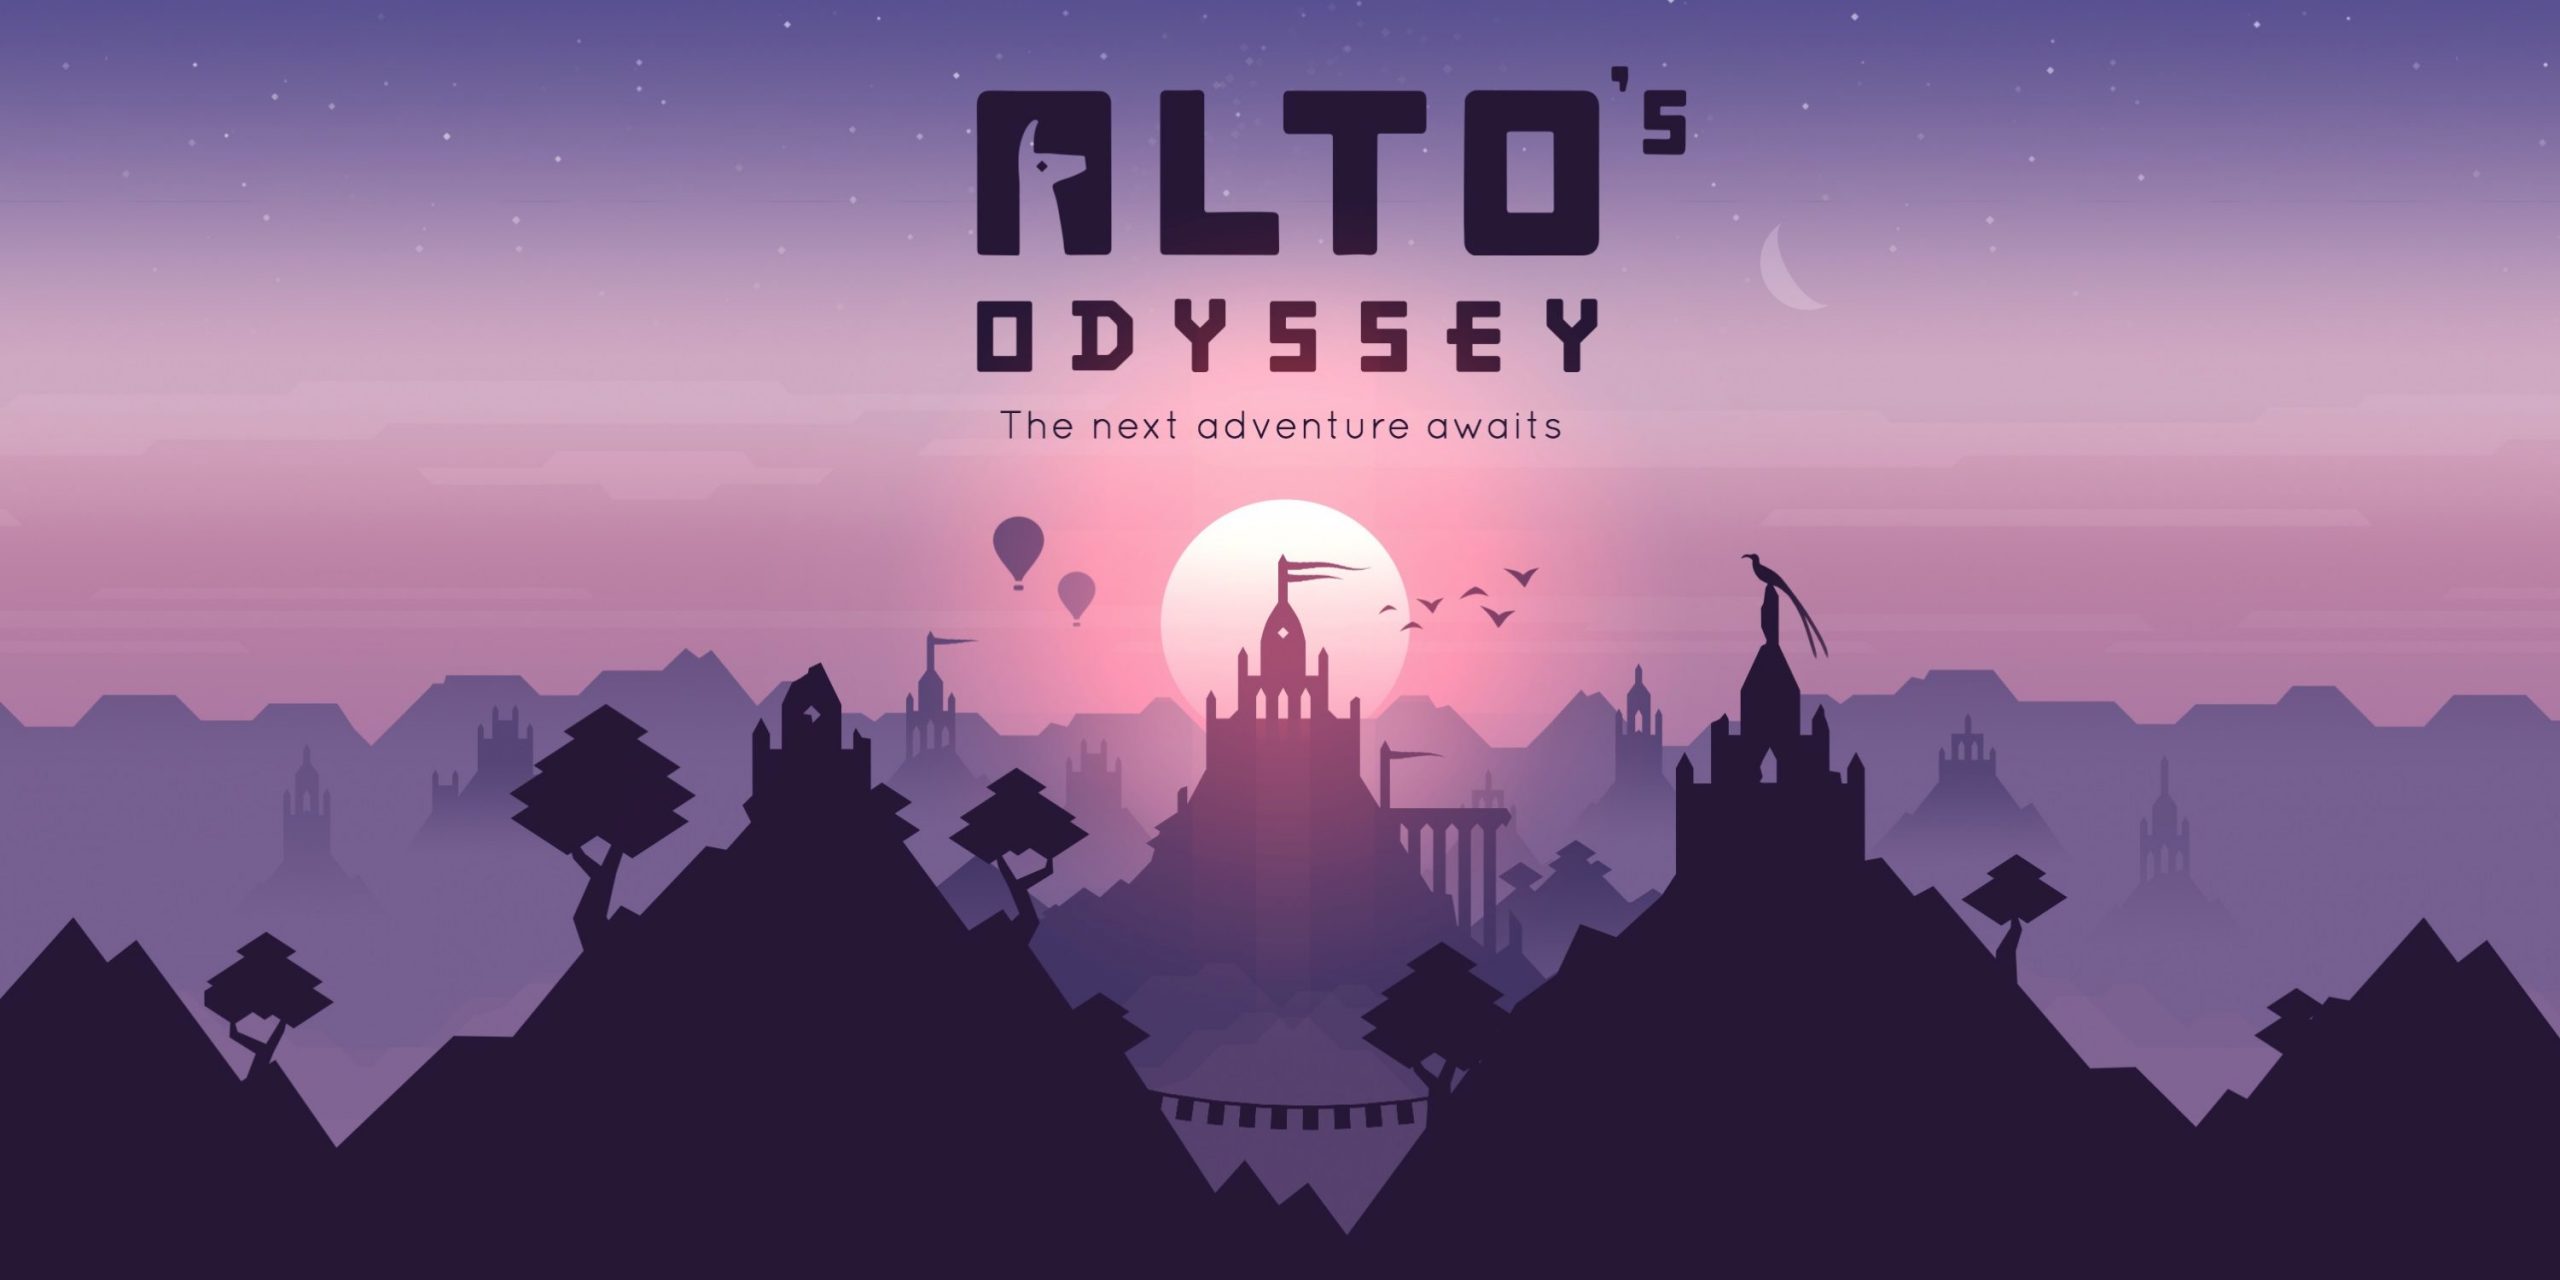 Alto's Odyssey for iPhone